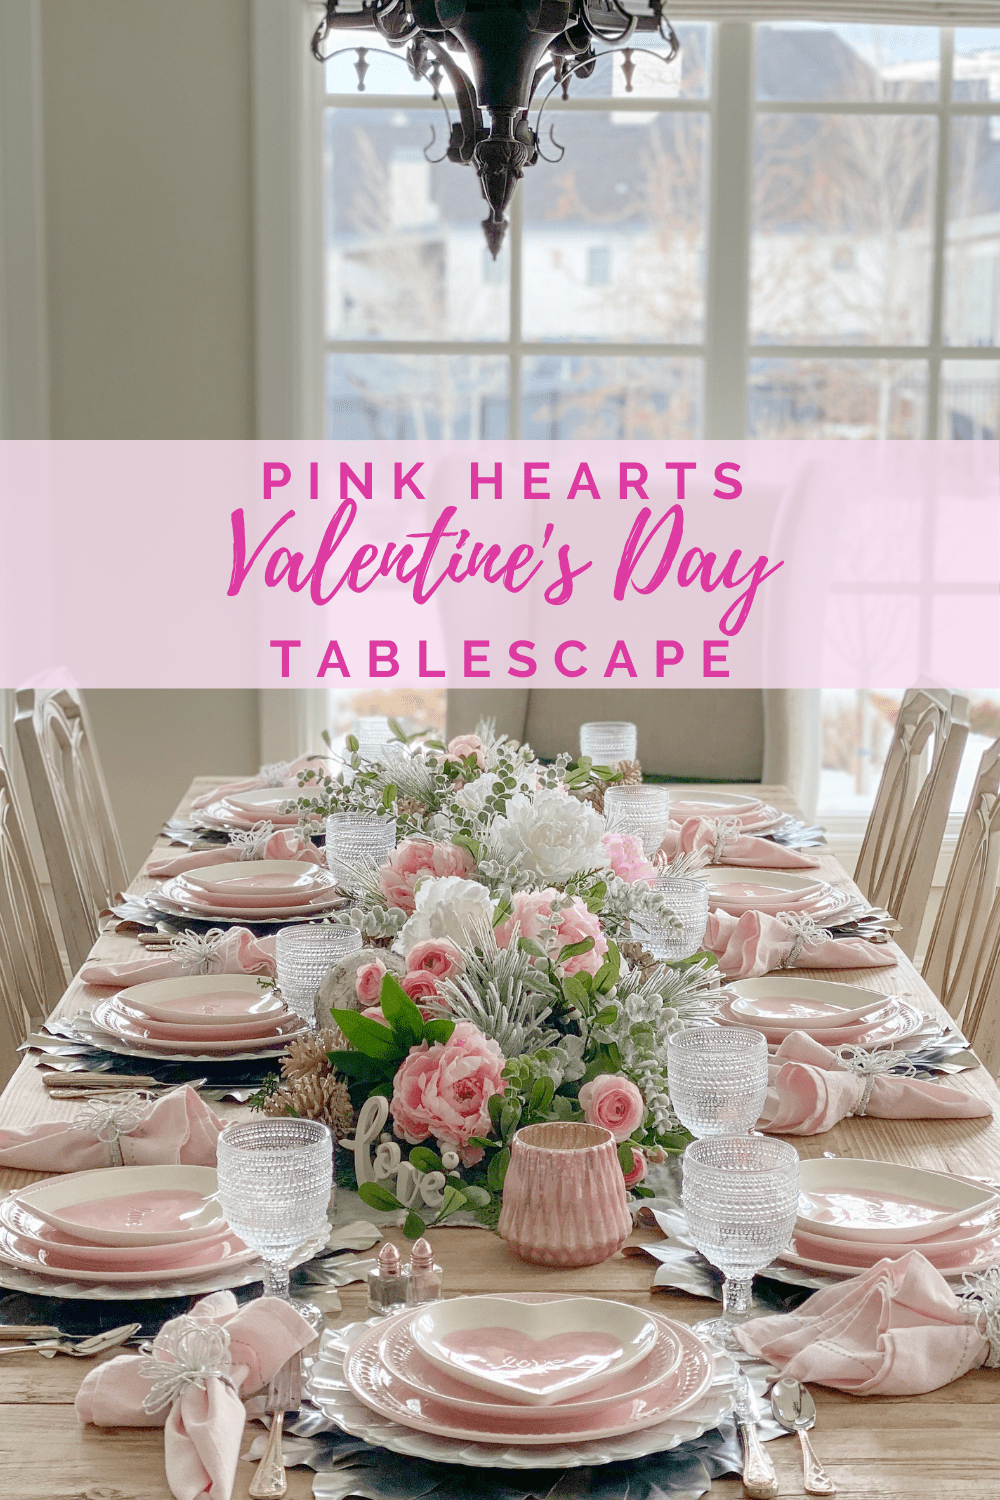 14 Valentine Table Centerpiece Ideas that Adds Beauty to Your Table!